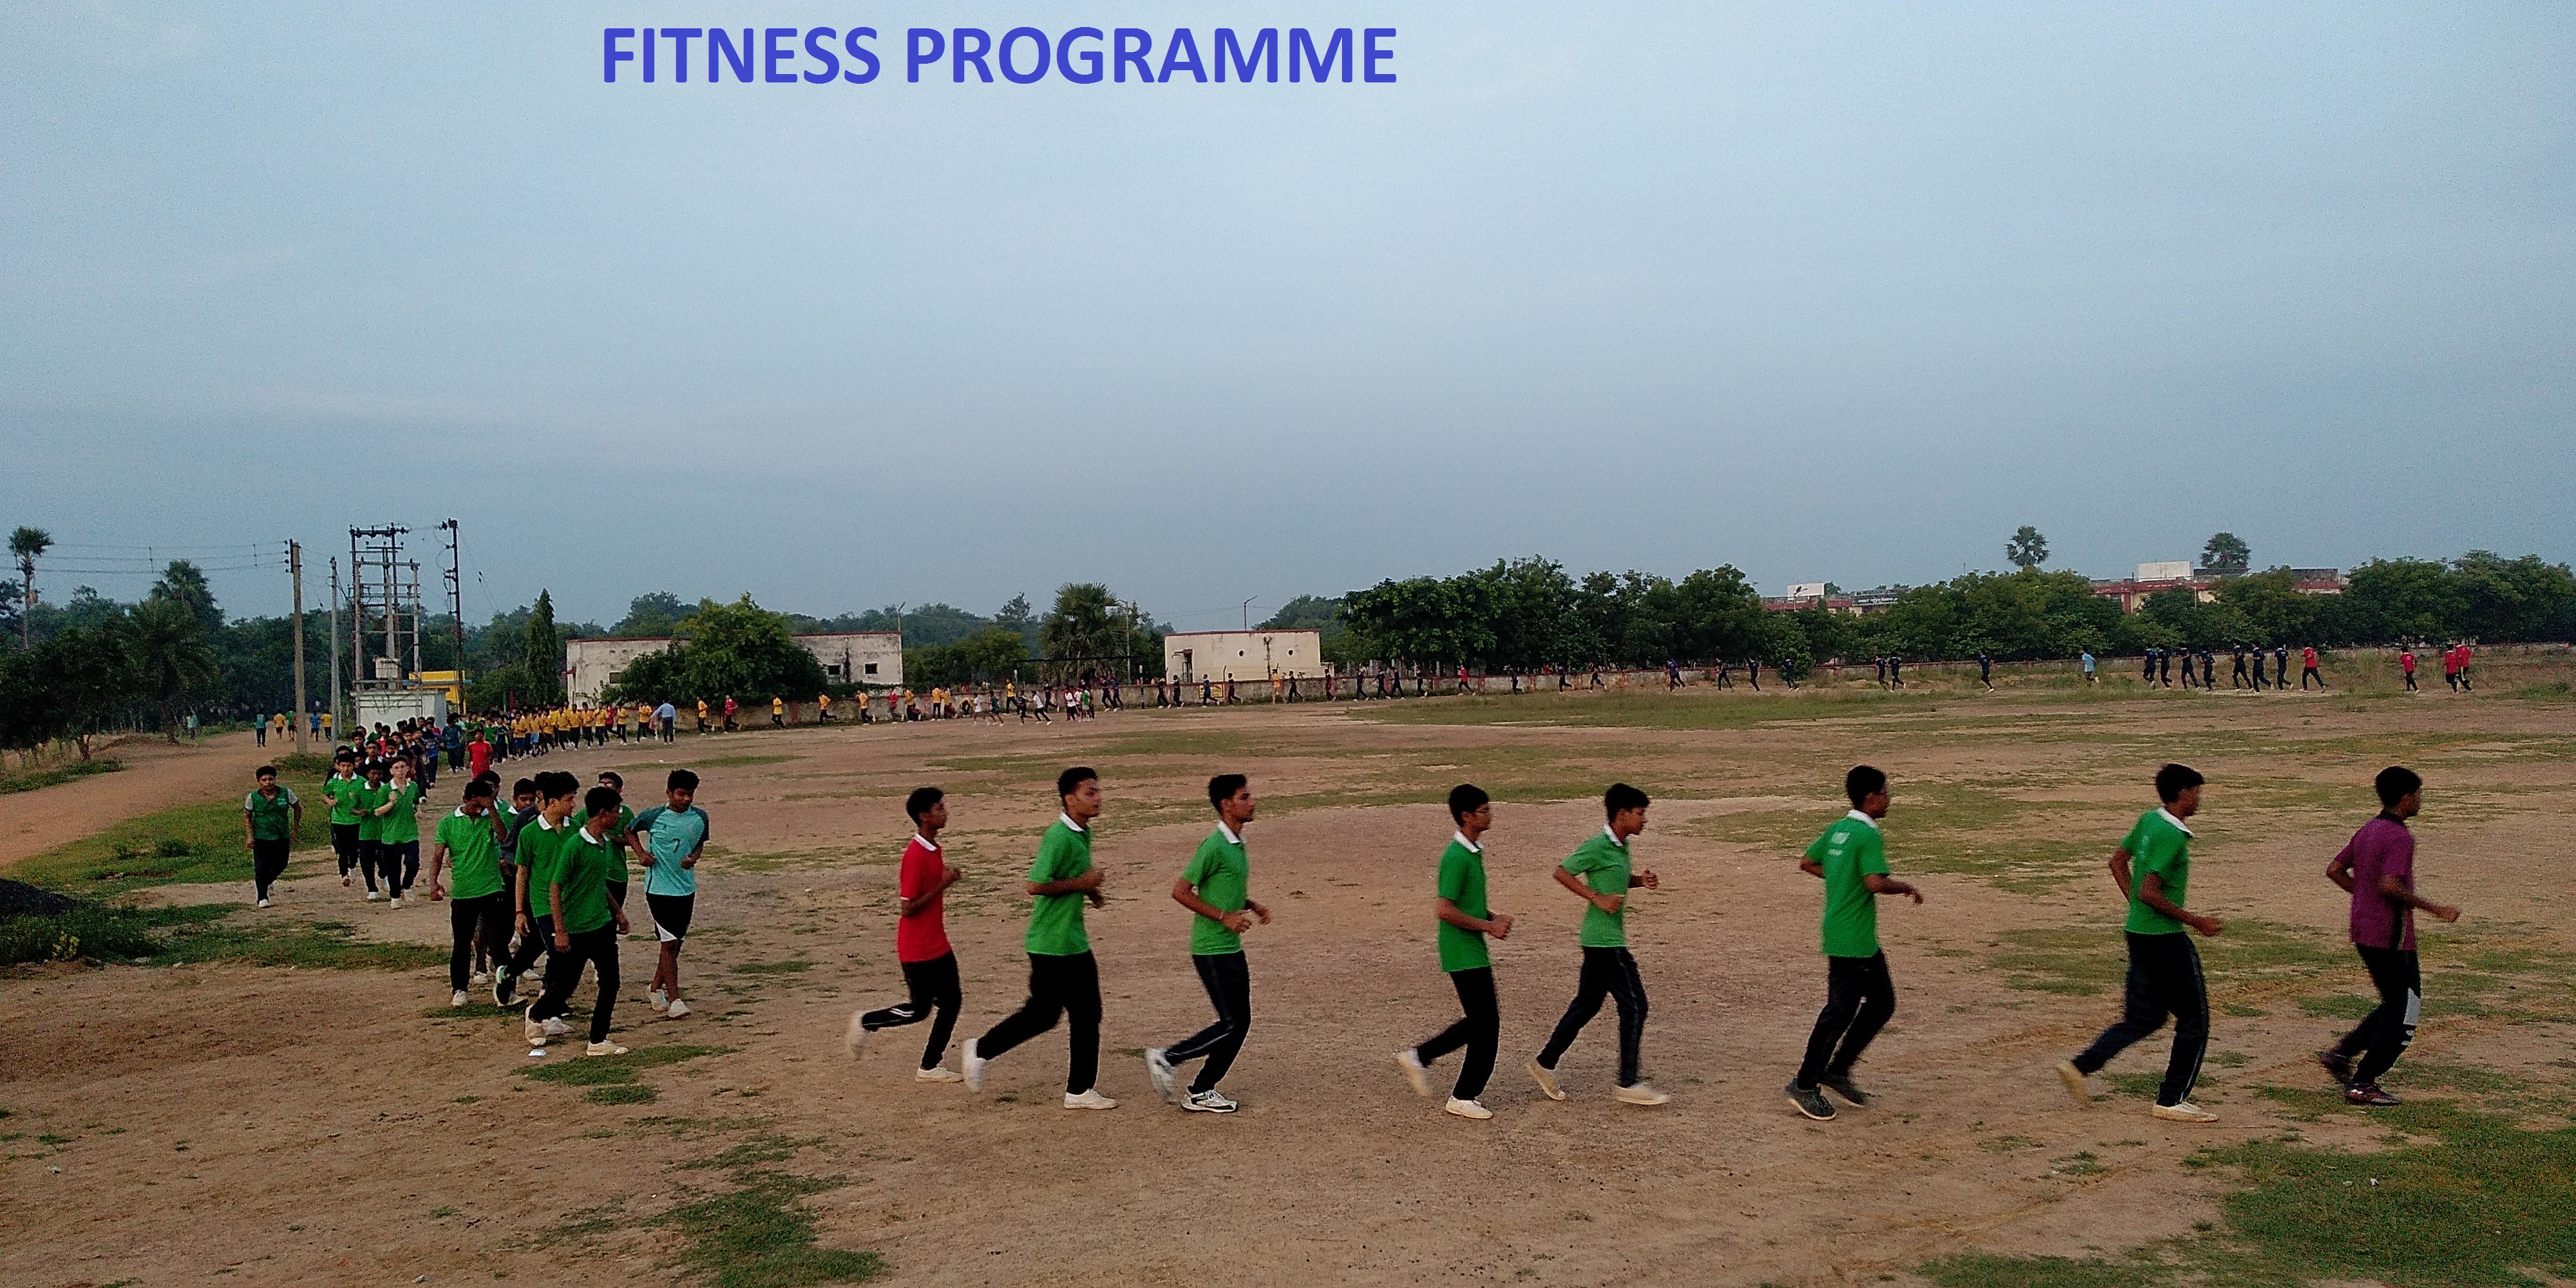 Games & Sports (Fitness Programme)